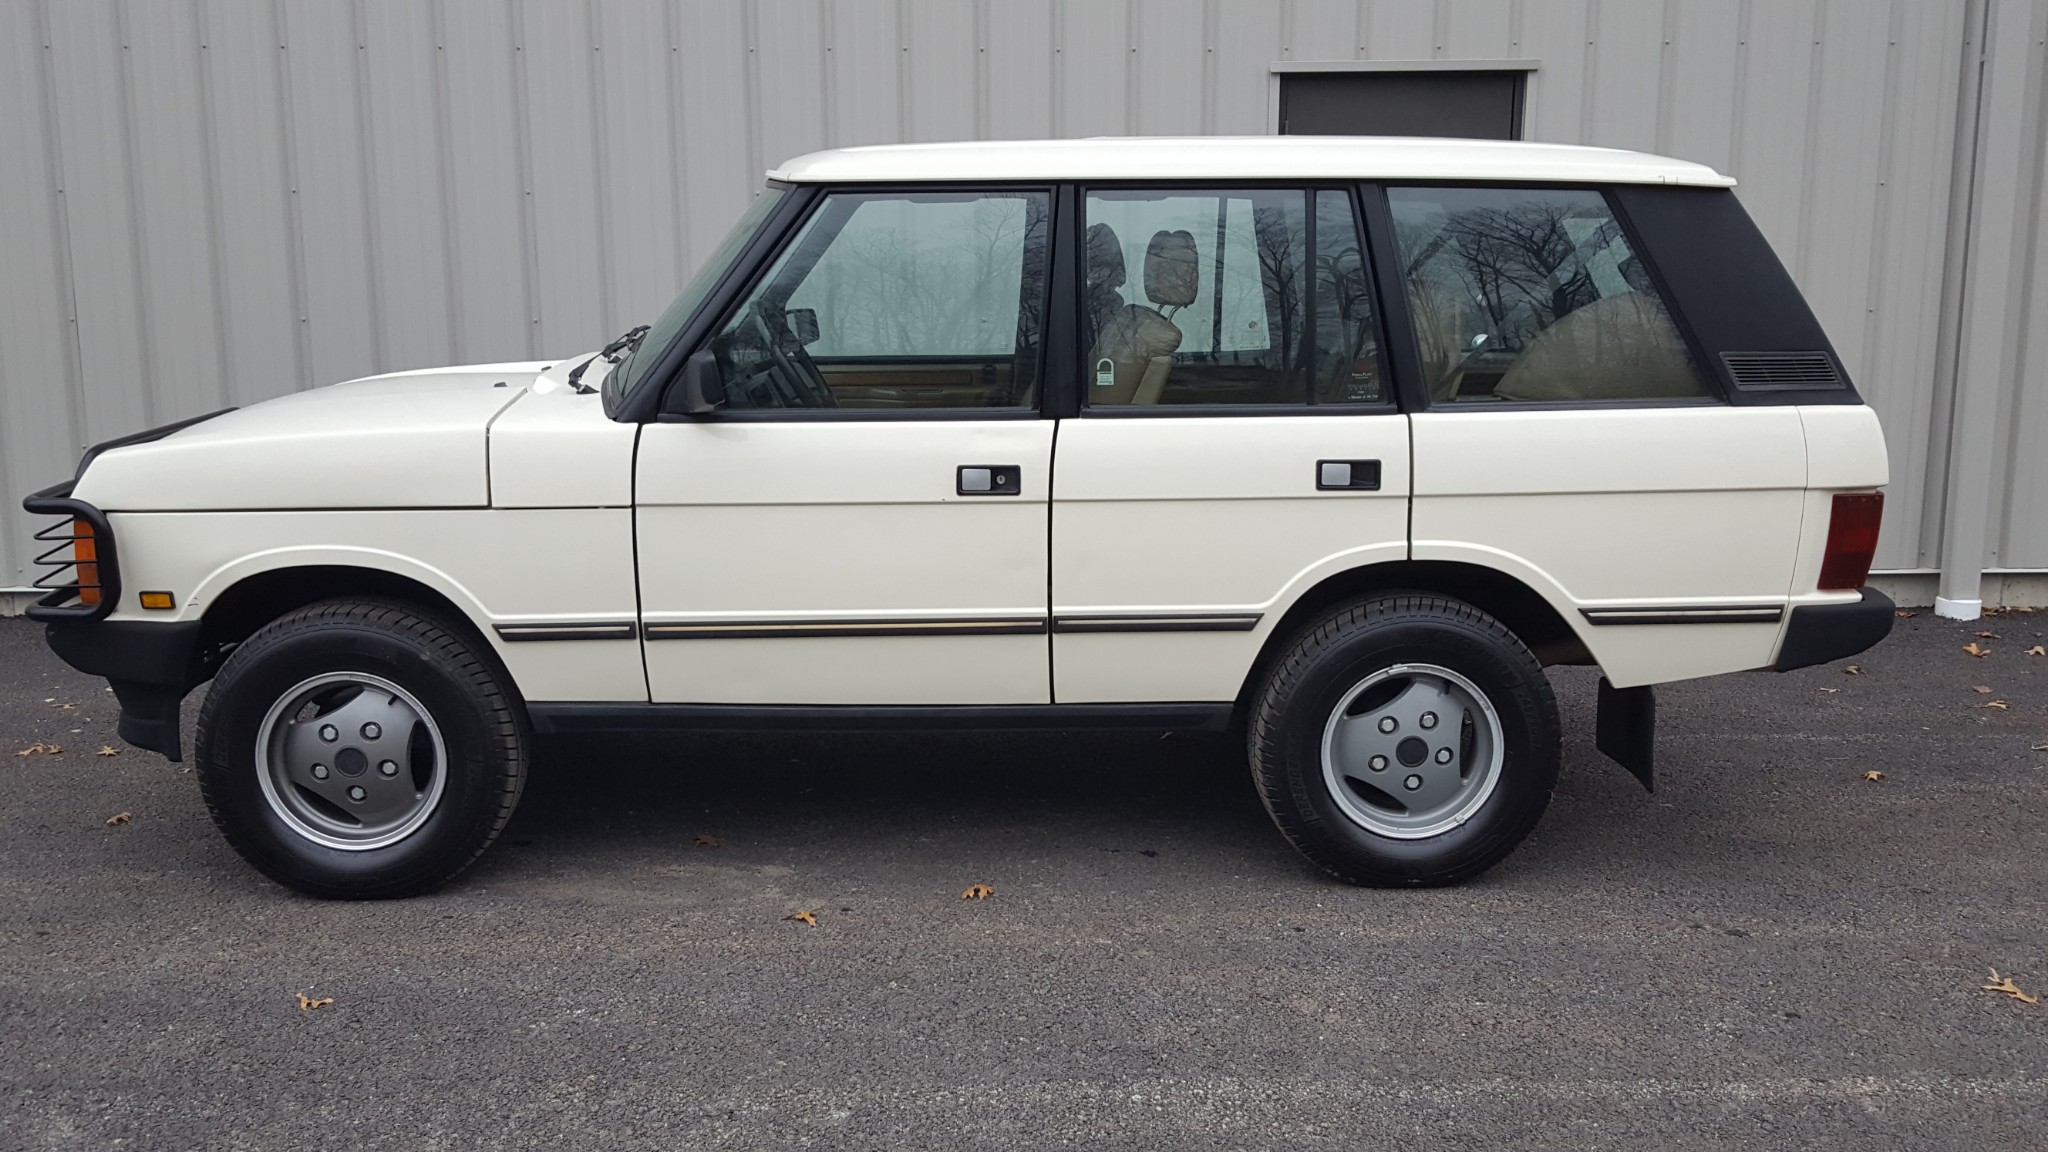 Vehicles Range Rover Classic HD Wallpaper | Background Image